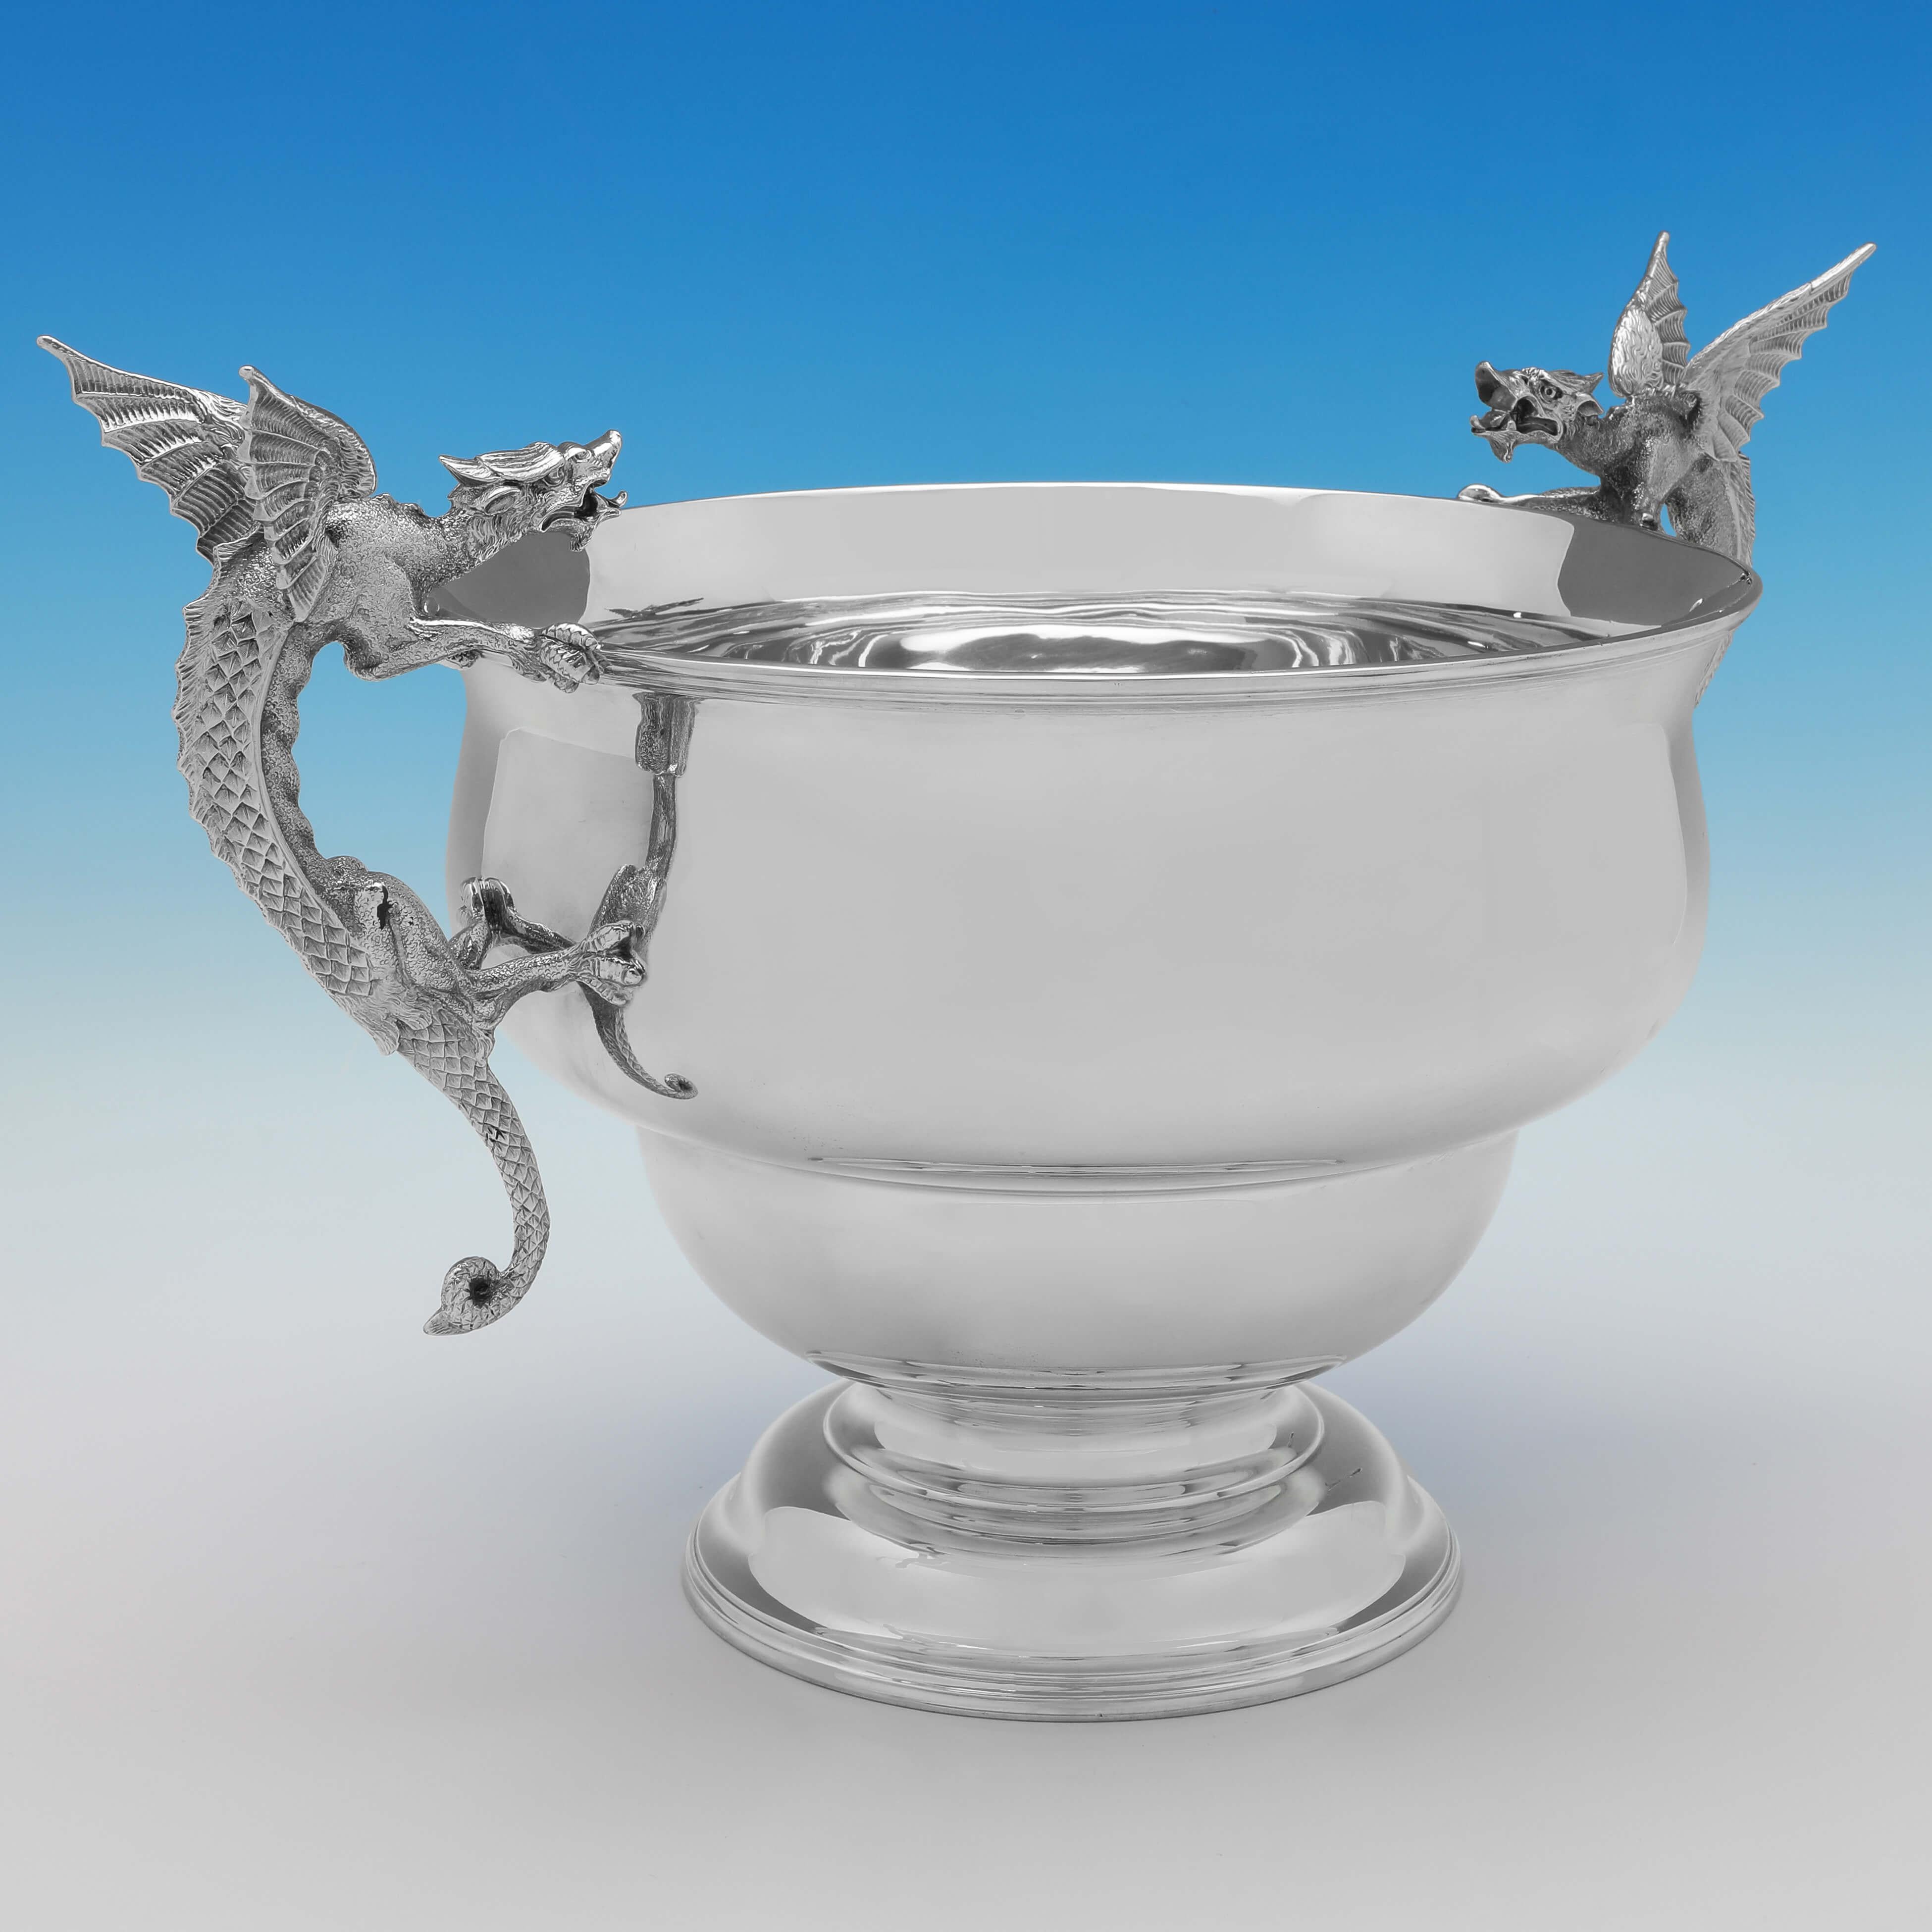 Hallmarked in London in 1910 by Goldsmiths & Silversmiths Co., this wonderful, Edwardian, Antique Sterling Silver Centrepiece Bowl, features a plain body, and 2 cast dragon handles

The bowl would make an ideal centrepiece, and could be used as a